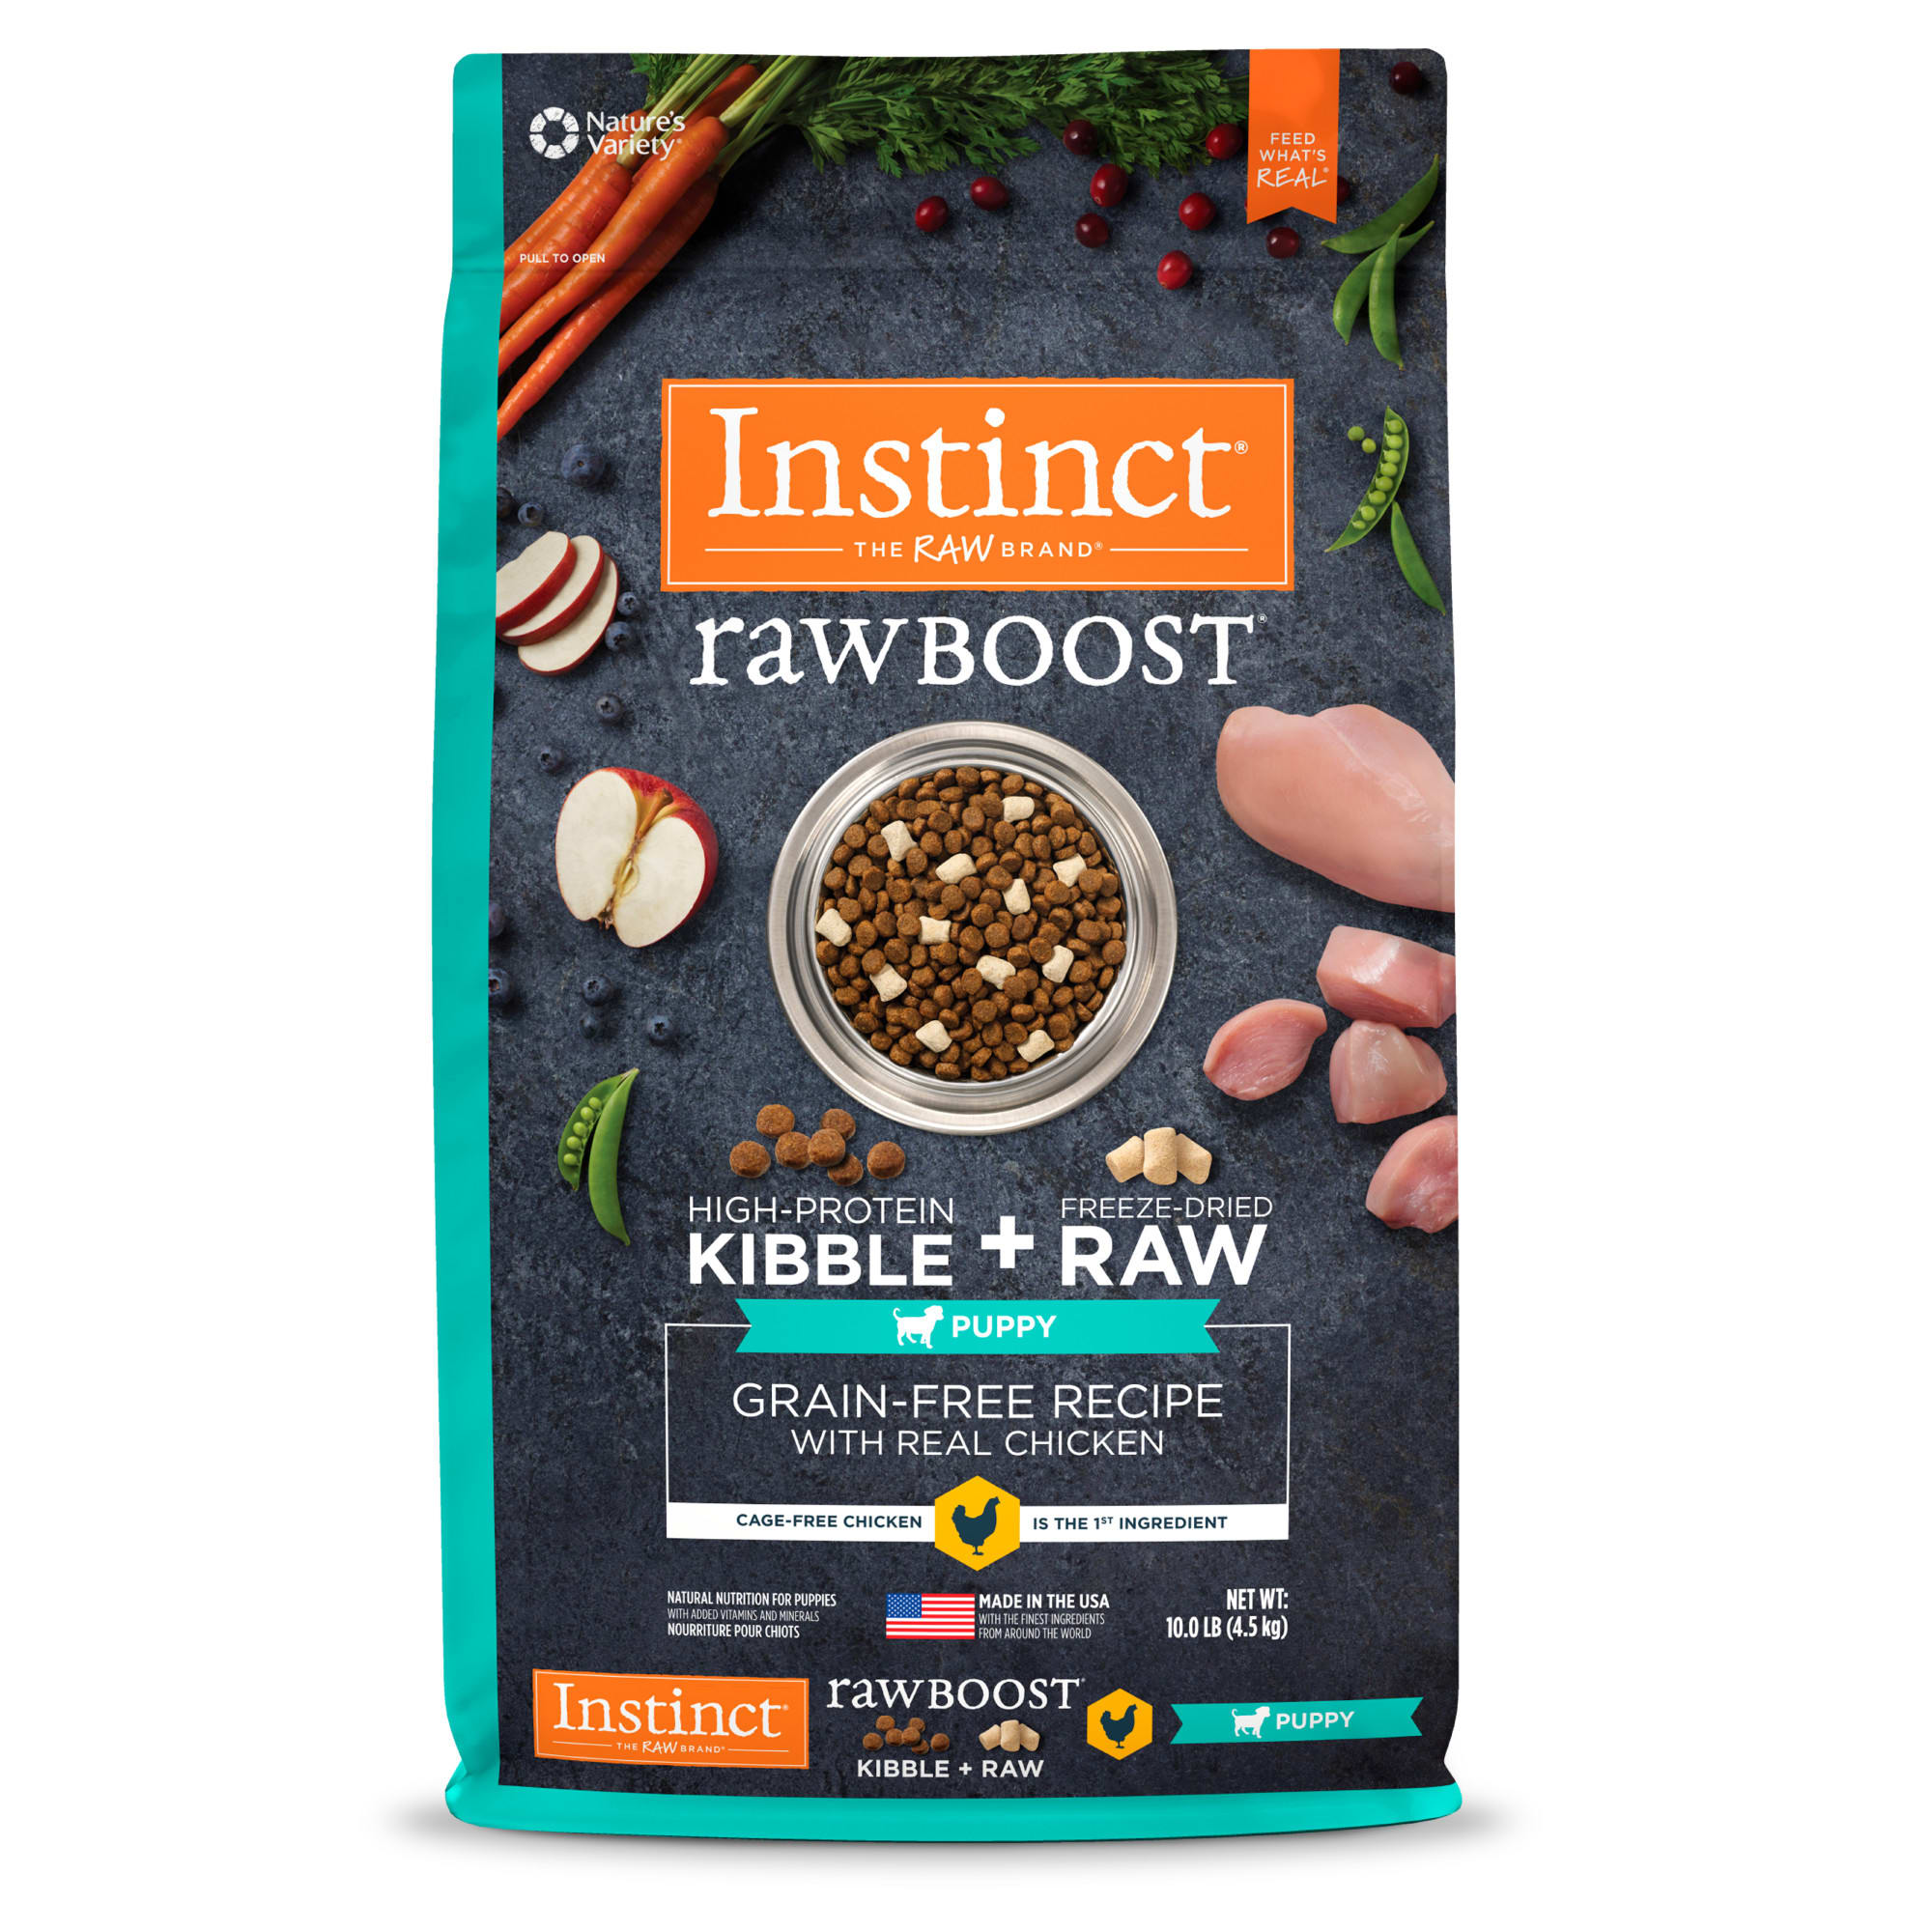 Instinct Raw Boost Puppy Grain Free Recipe with Real Chicken Natural Dry Dog Food by Nature